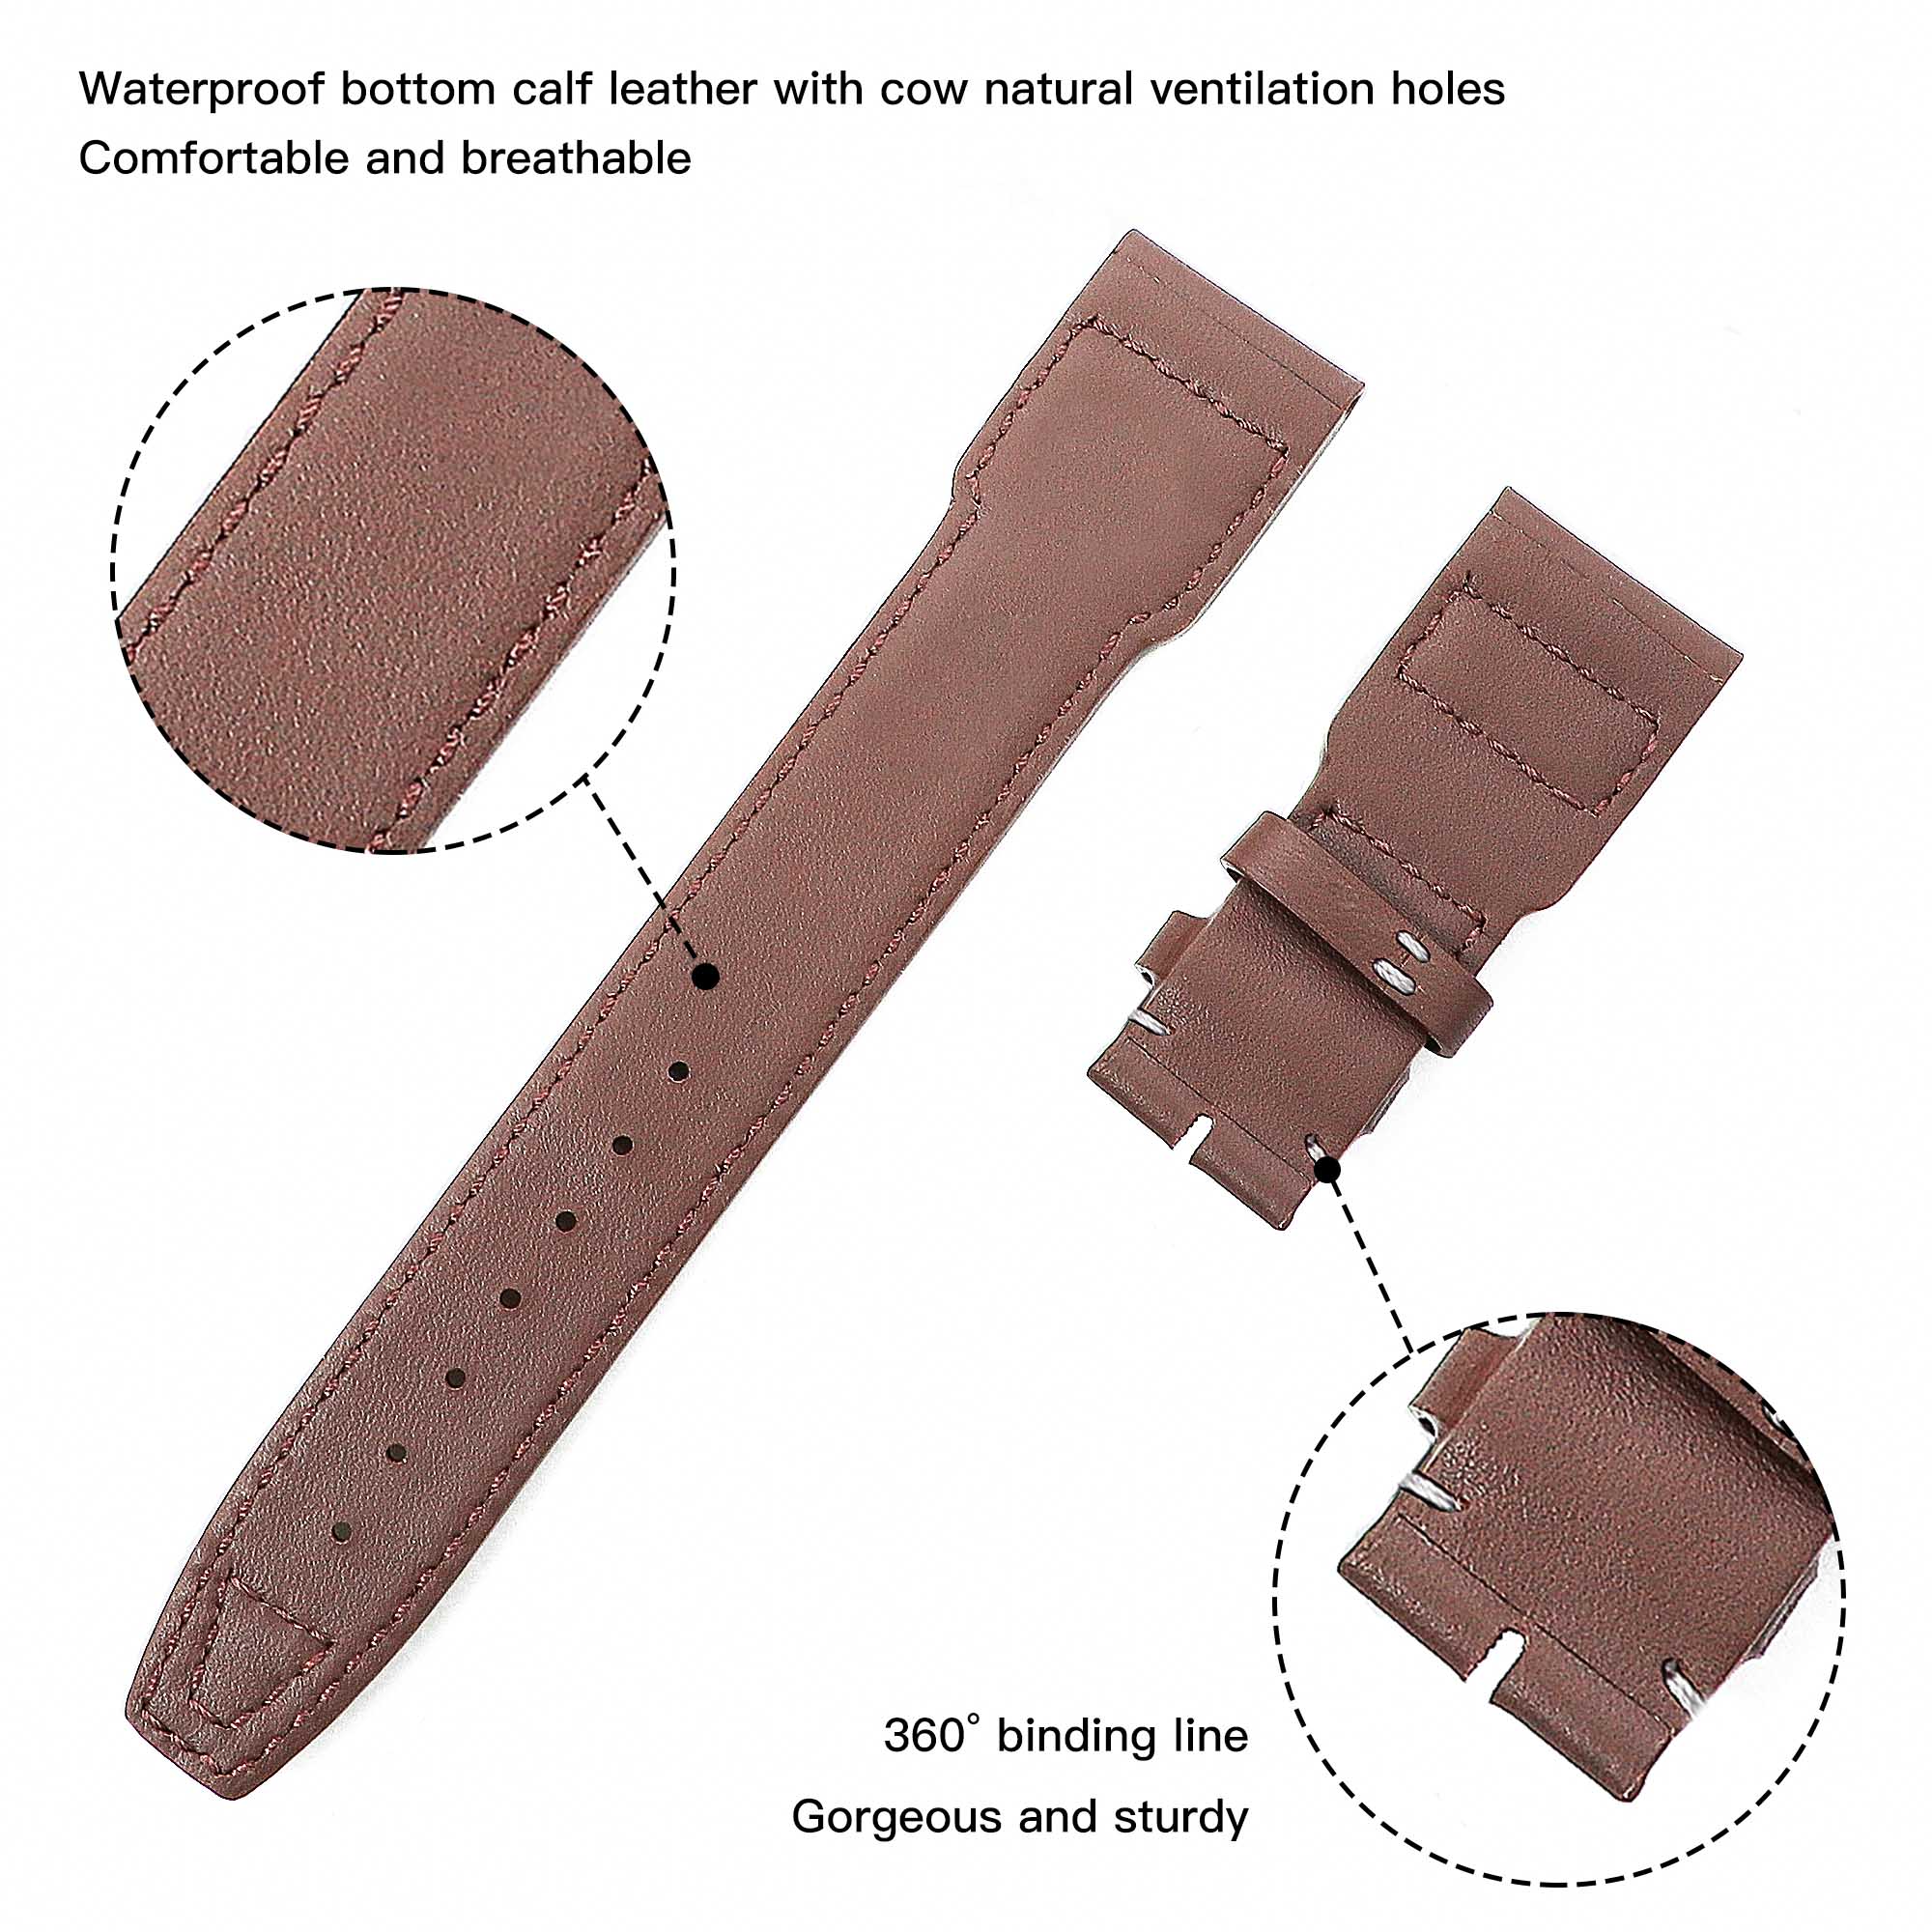 Custom premium Brown calfskin replacement IWC watch straps and watchbands for IWC Big Pilot watches for sale - High-quality IWC leather strap replacement 22mm 21mm with rivets